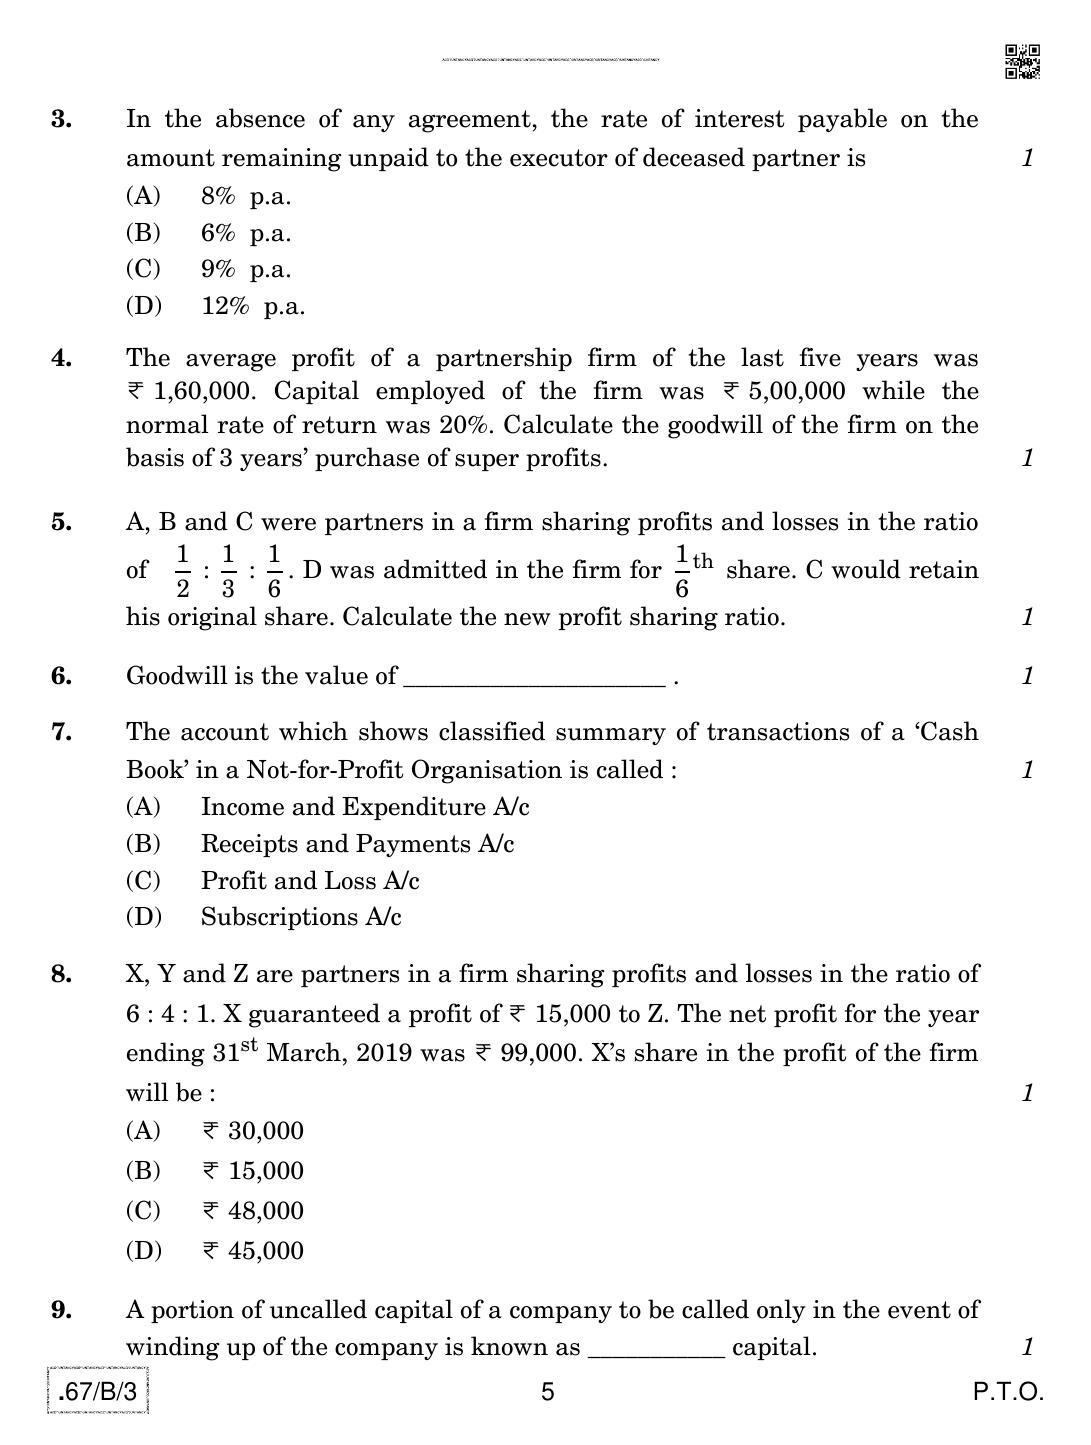 CBSE Class 12 67-C-3 - Accountancy 2020 Compartment Question Paper - Page 5